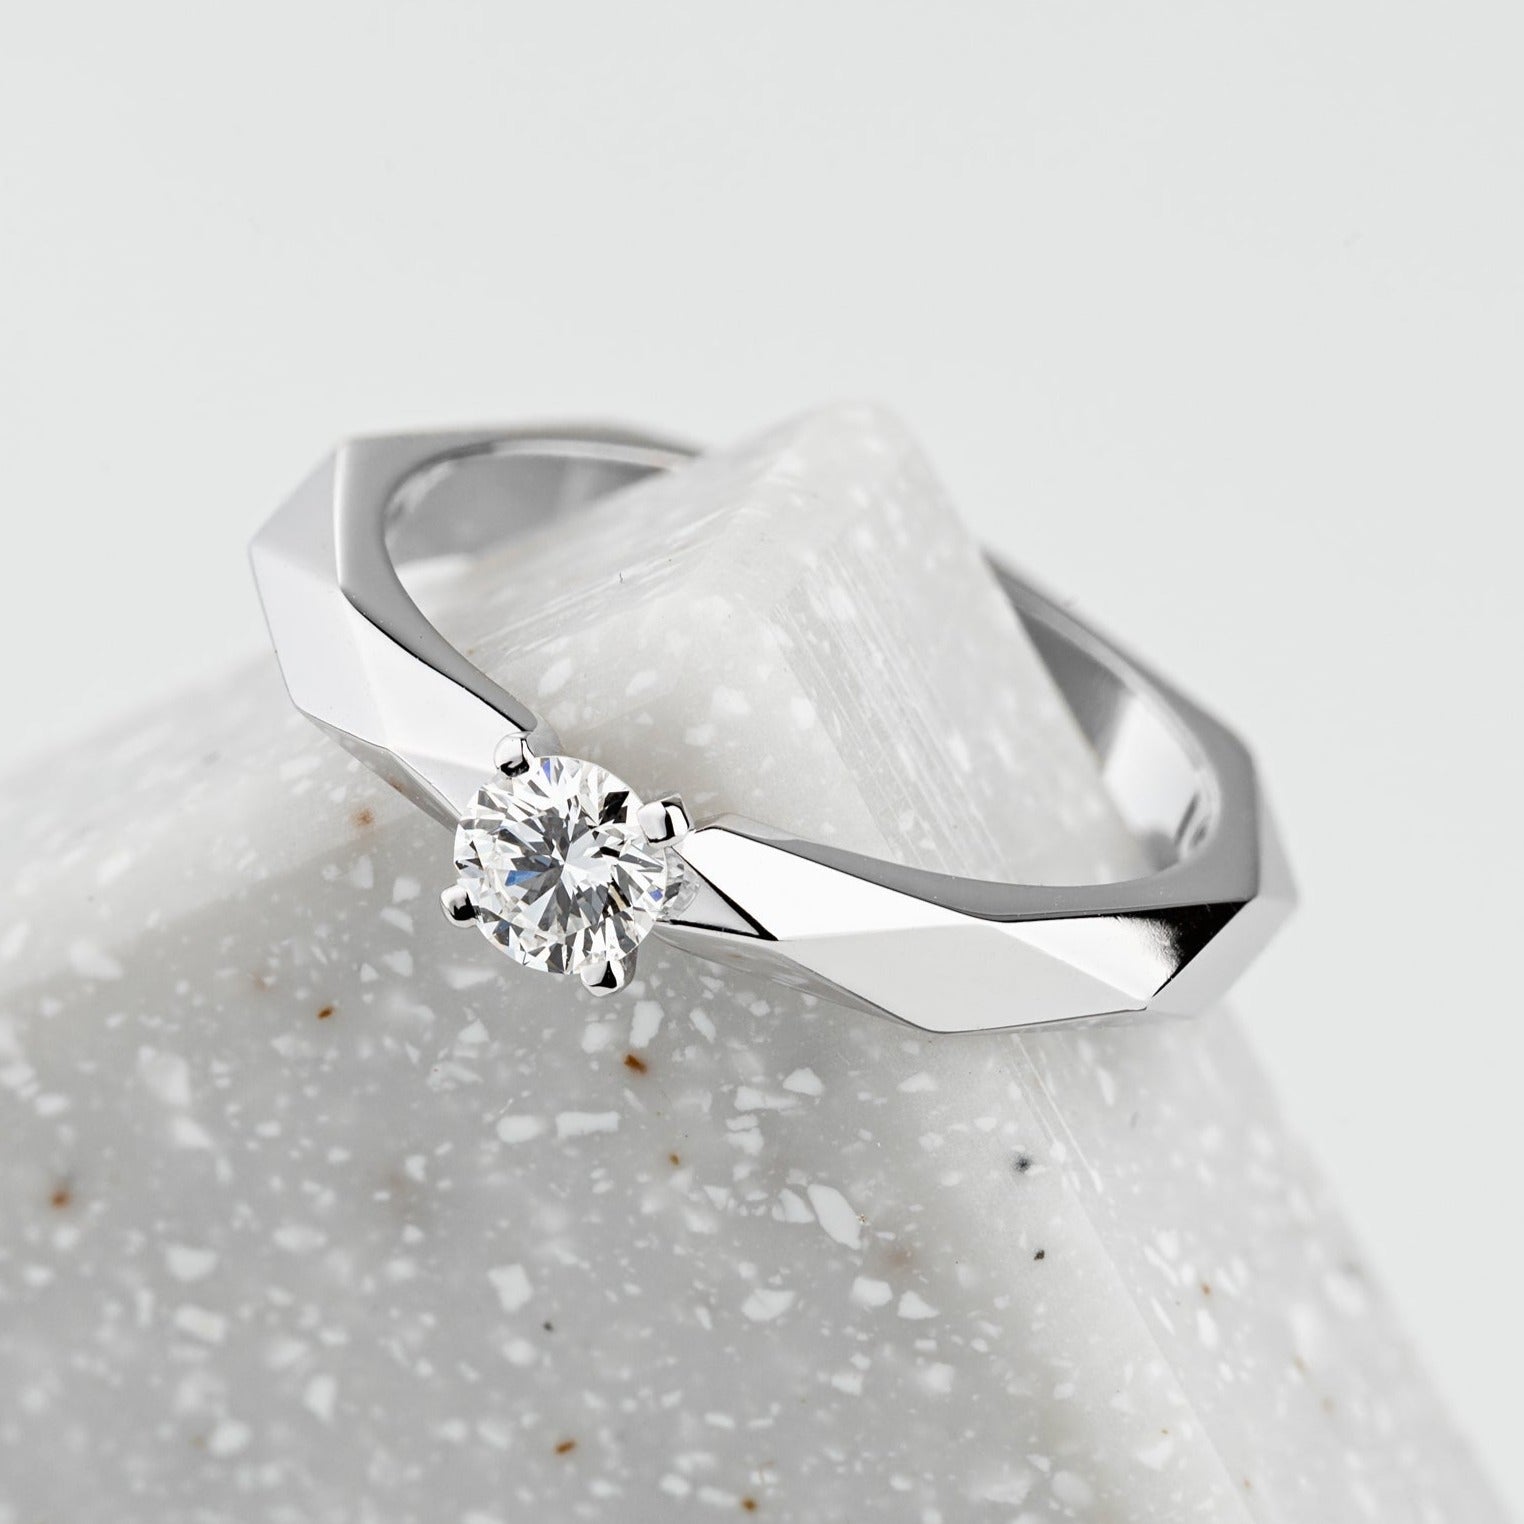 Faceted engagement ring with diamond - escorialjewelry